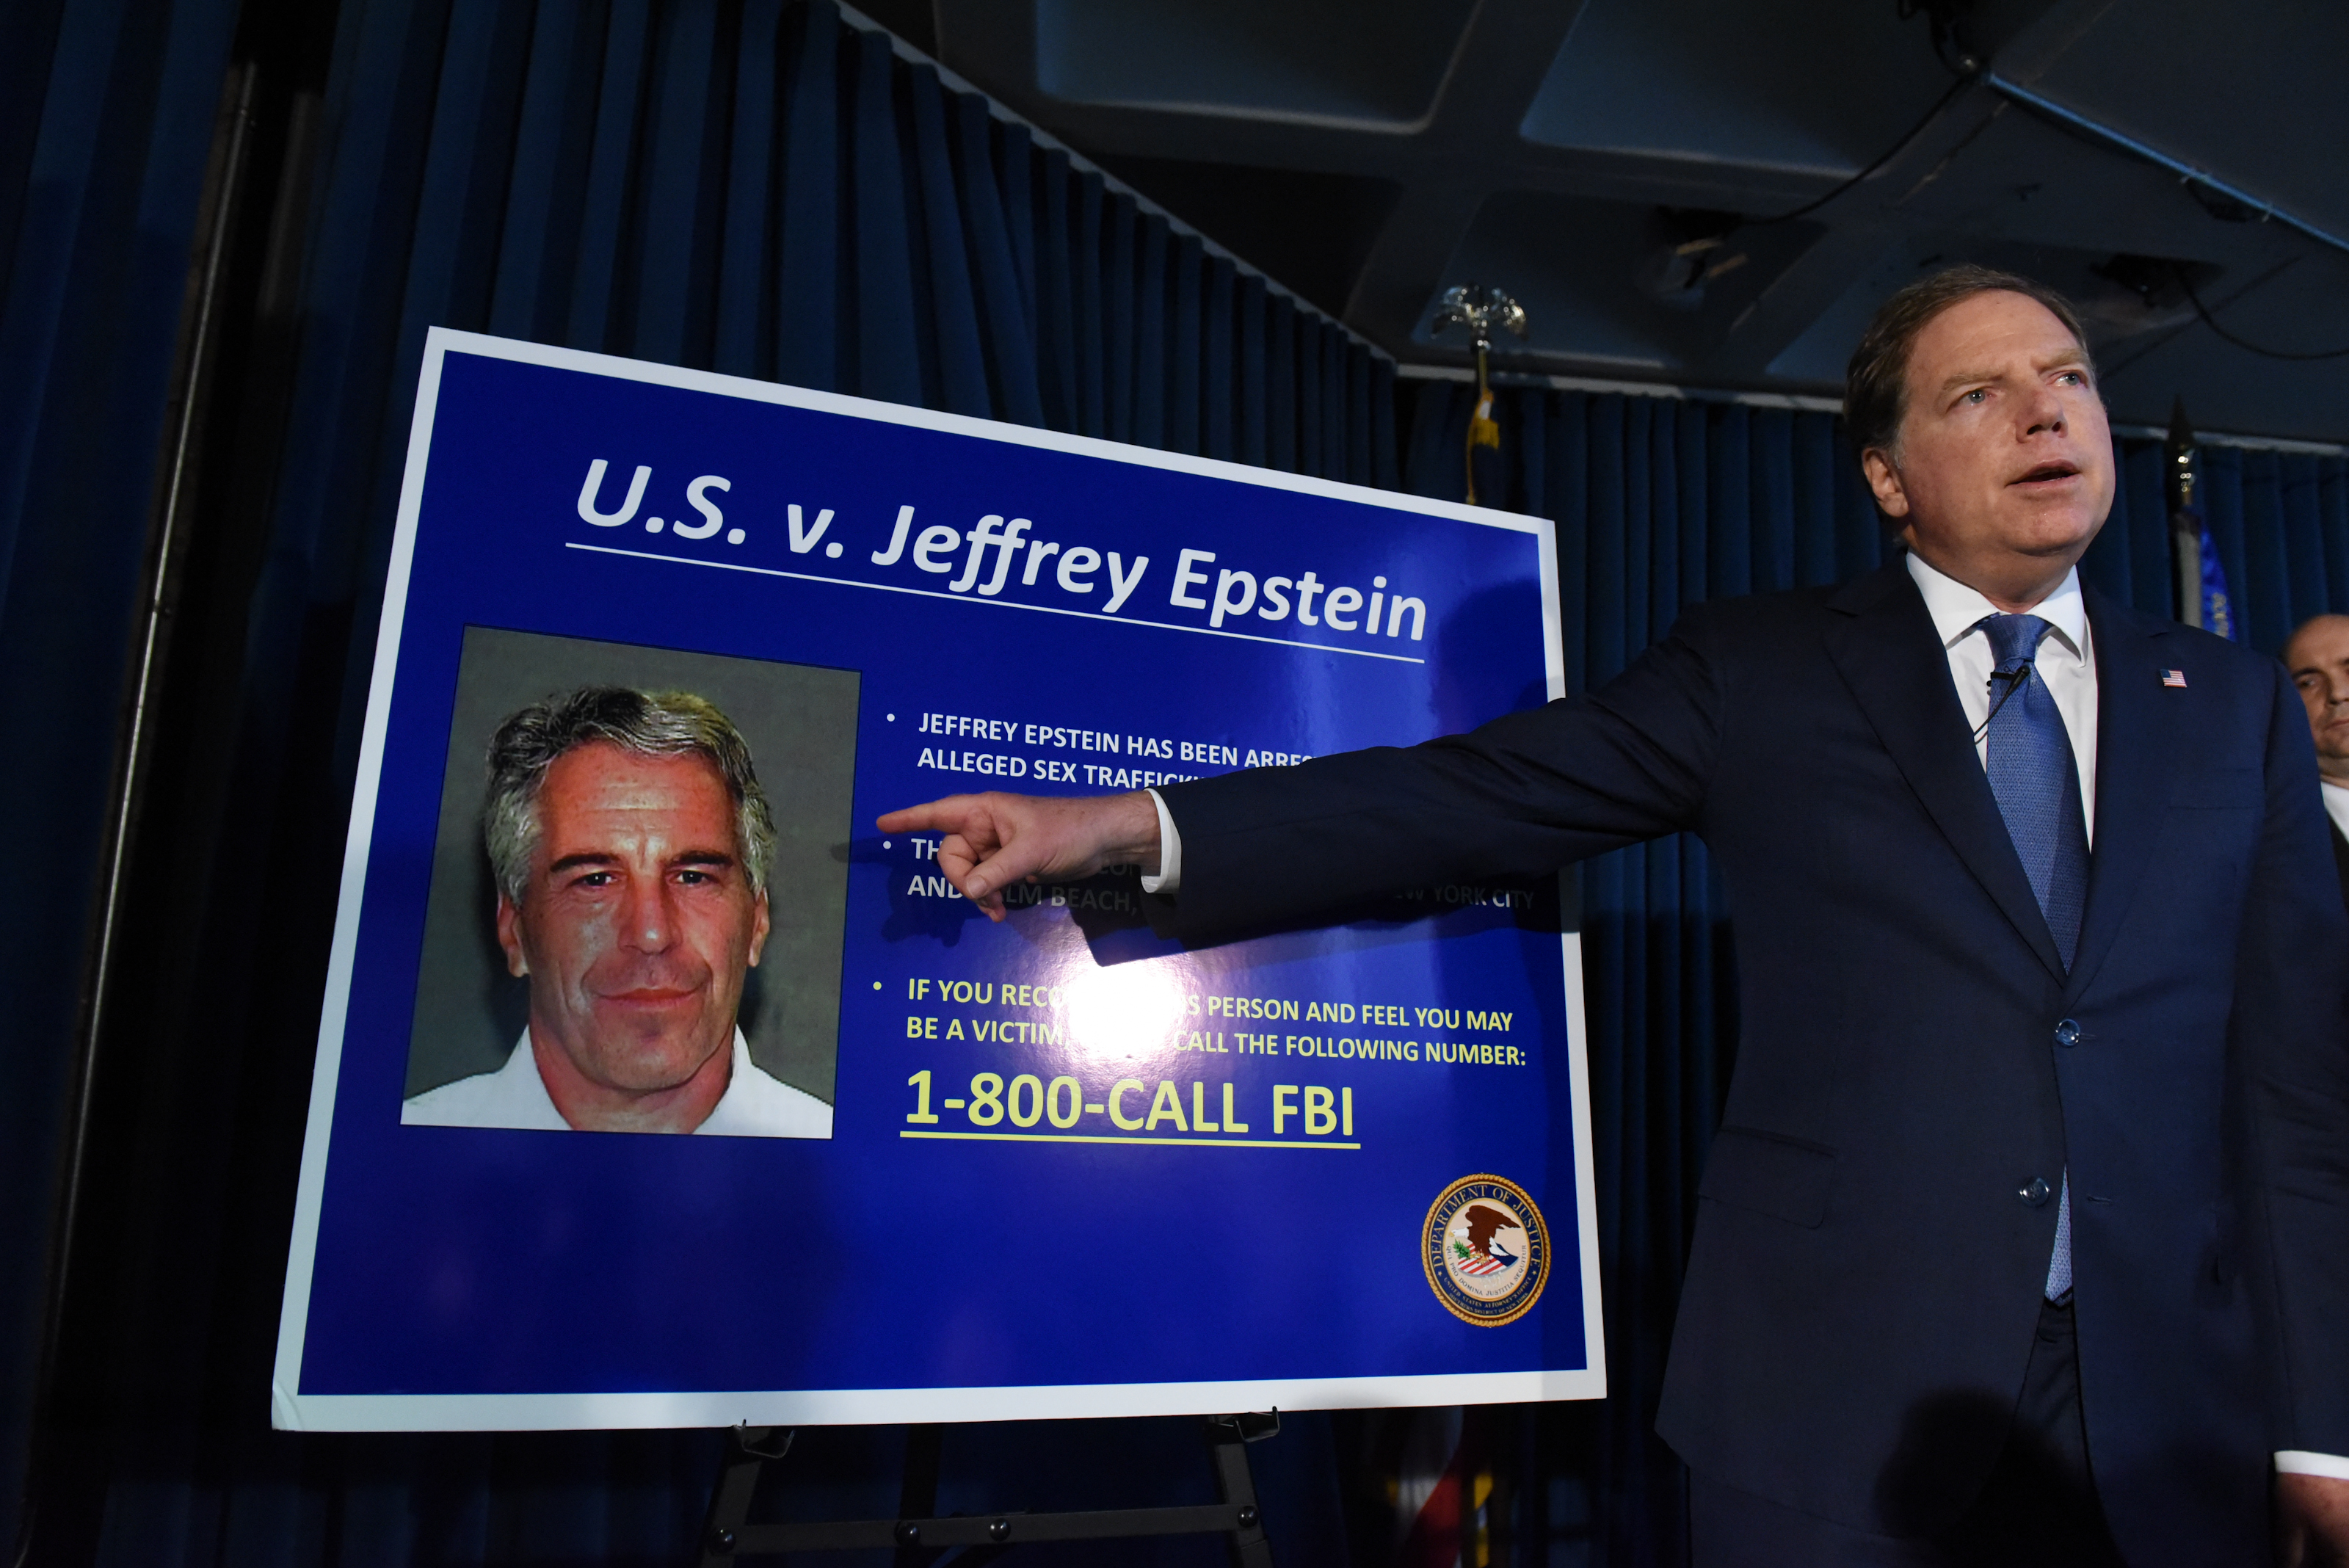 NEW YORK, NY - JULY 08: US Attorney for the Southern District of New York Geoffrey Berman announces charges against Jeffery Epstein on July 8, 2019 in New York City. Epstein will be charged with one count of sex trafficking of minors and one count of conspiracy to engage in sex trafficking of minors. (Photo by Stephanie Keith/Getty Images)